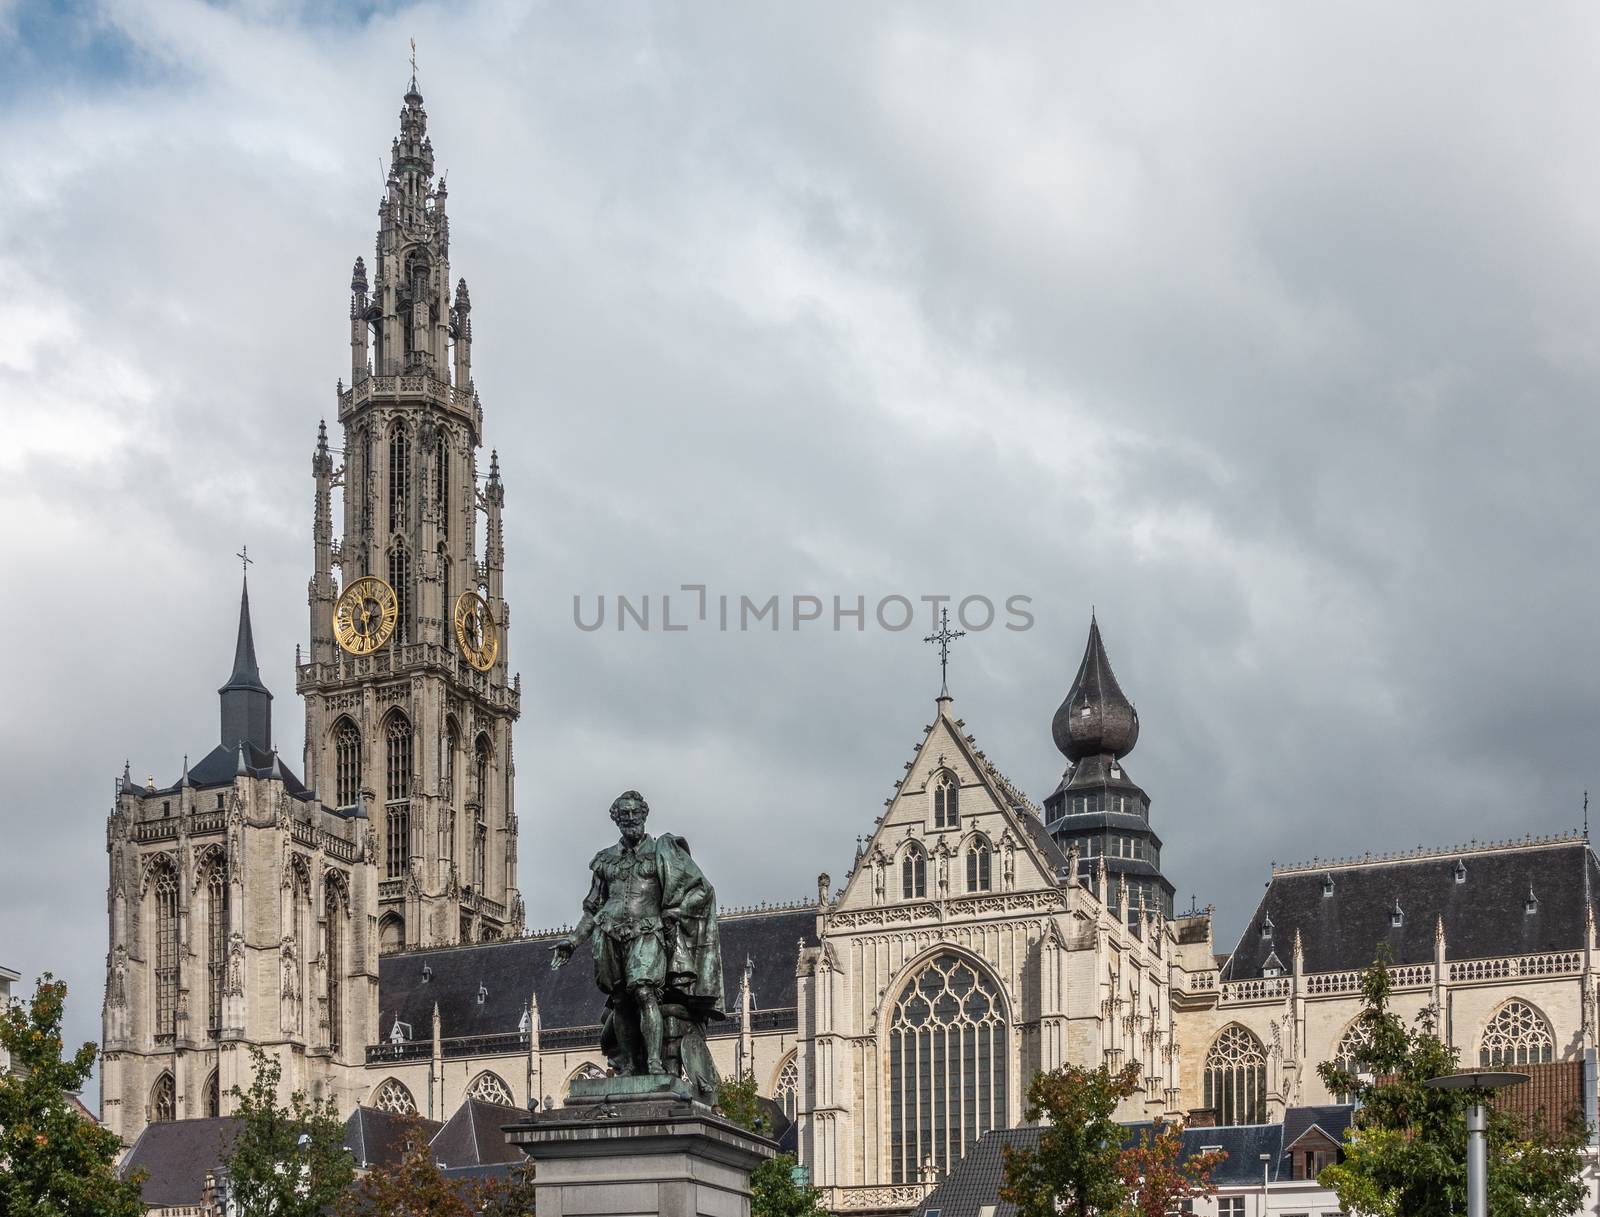 Antwerp, Belgium - September 24, 2018: Peter Paul Rubens bronze statue with towers, nave and chancel of Onze-Lieve-Vrouwe Cathedral of Our Lady in back under white cloudy sky.